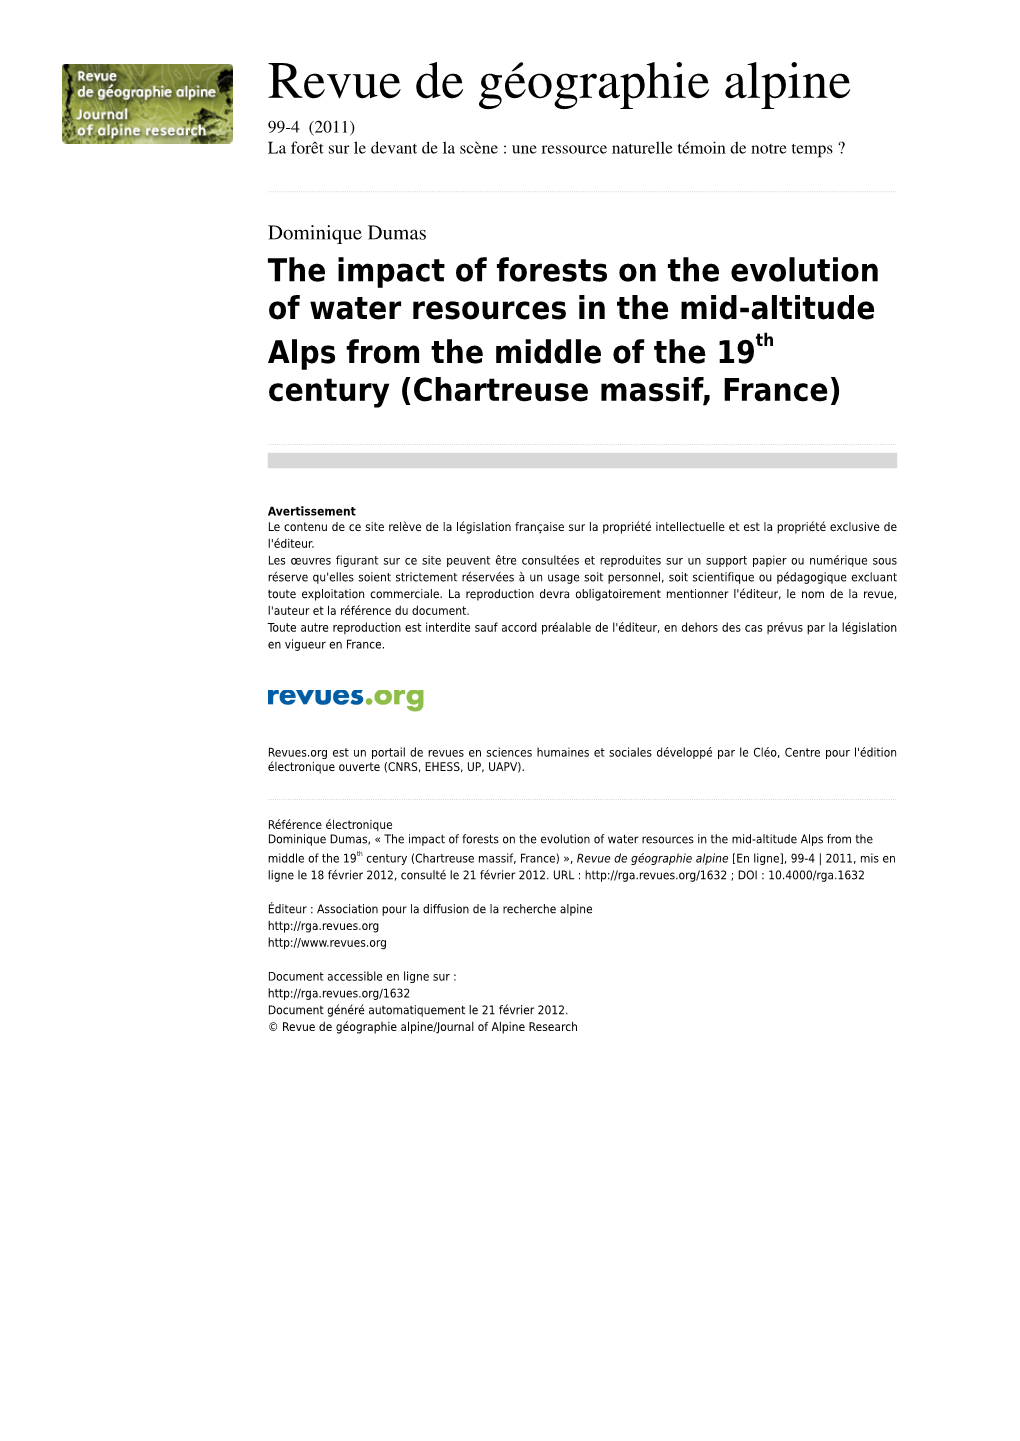 The Impact of Forests on the Evolution of Water Resources in the Mid-Altitude Alps from the Middle of the 19Th Century (Chartreuse Massif, France)